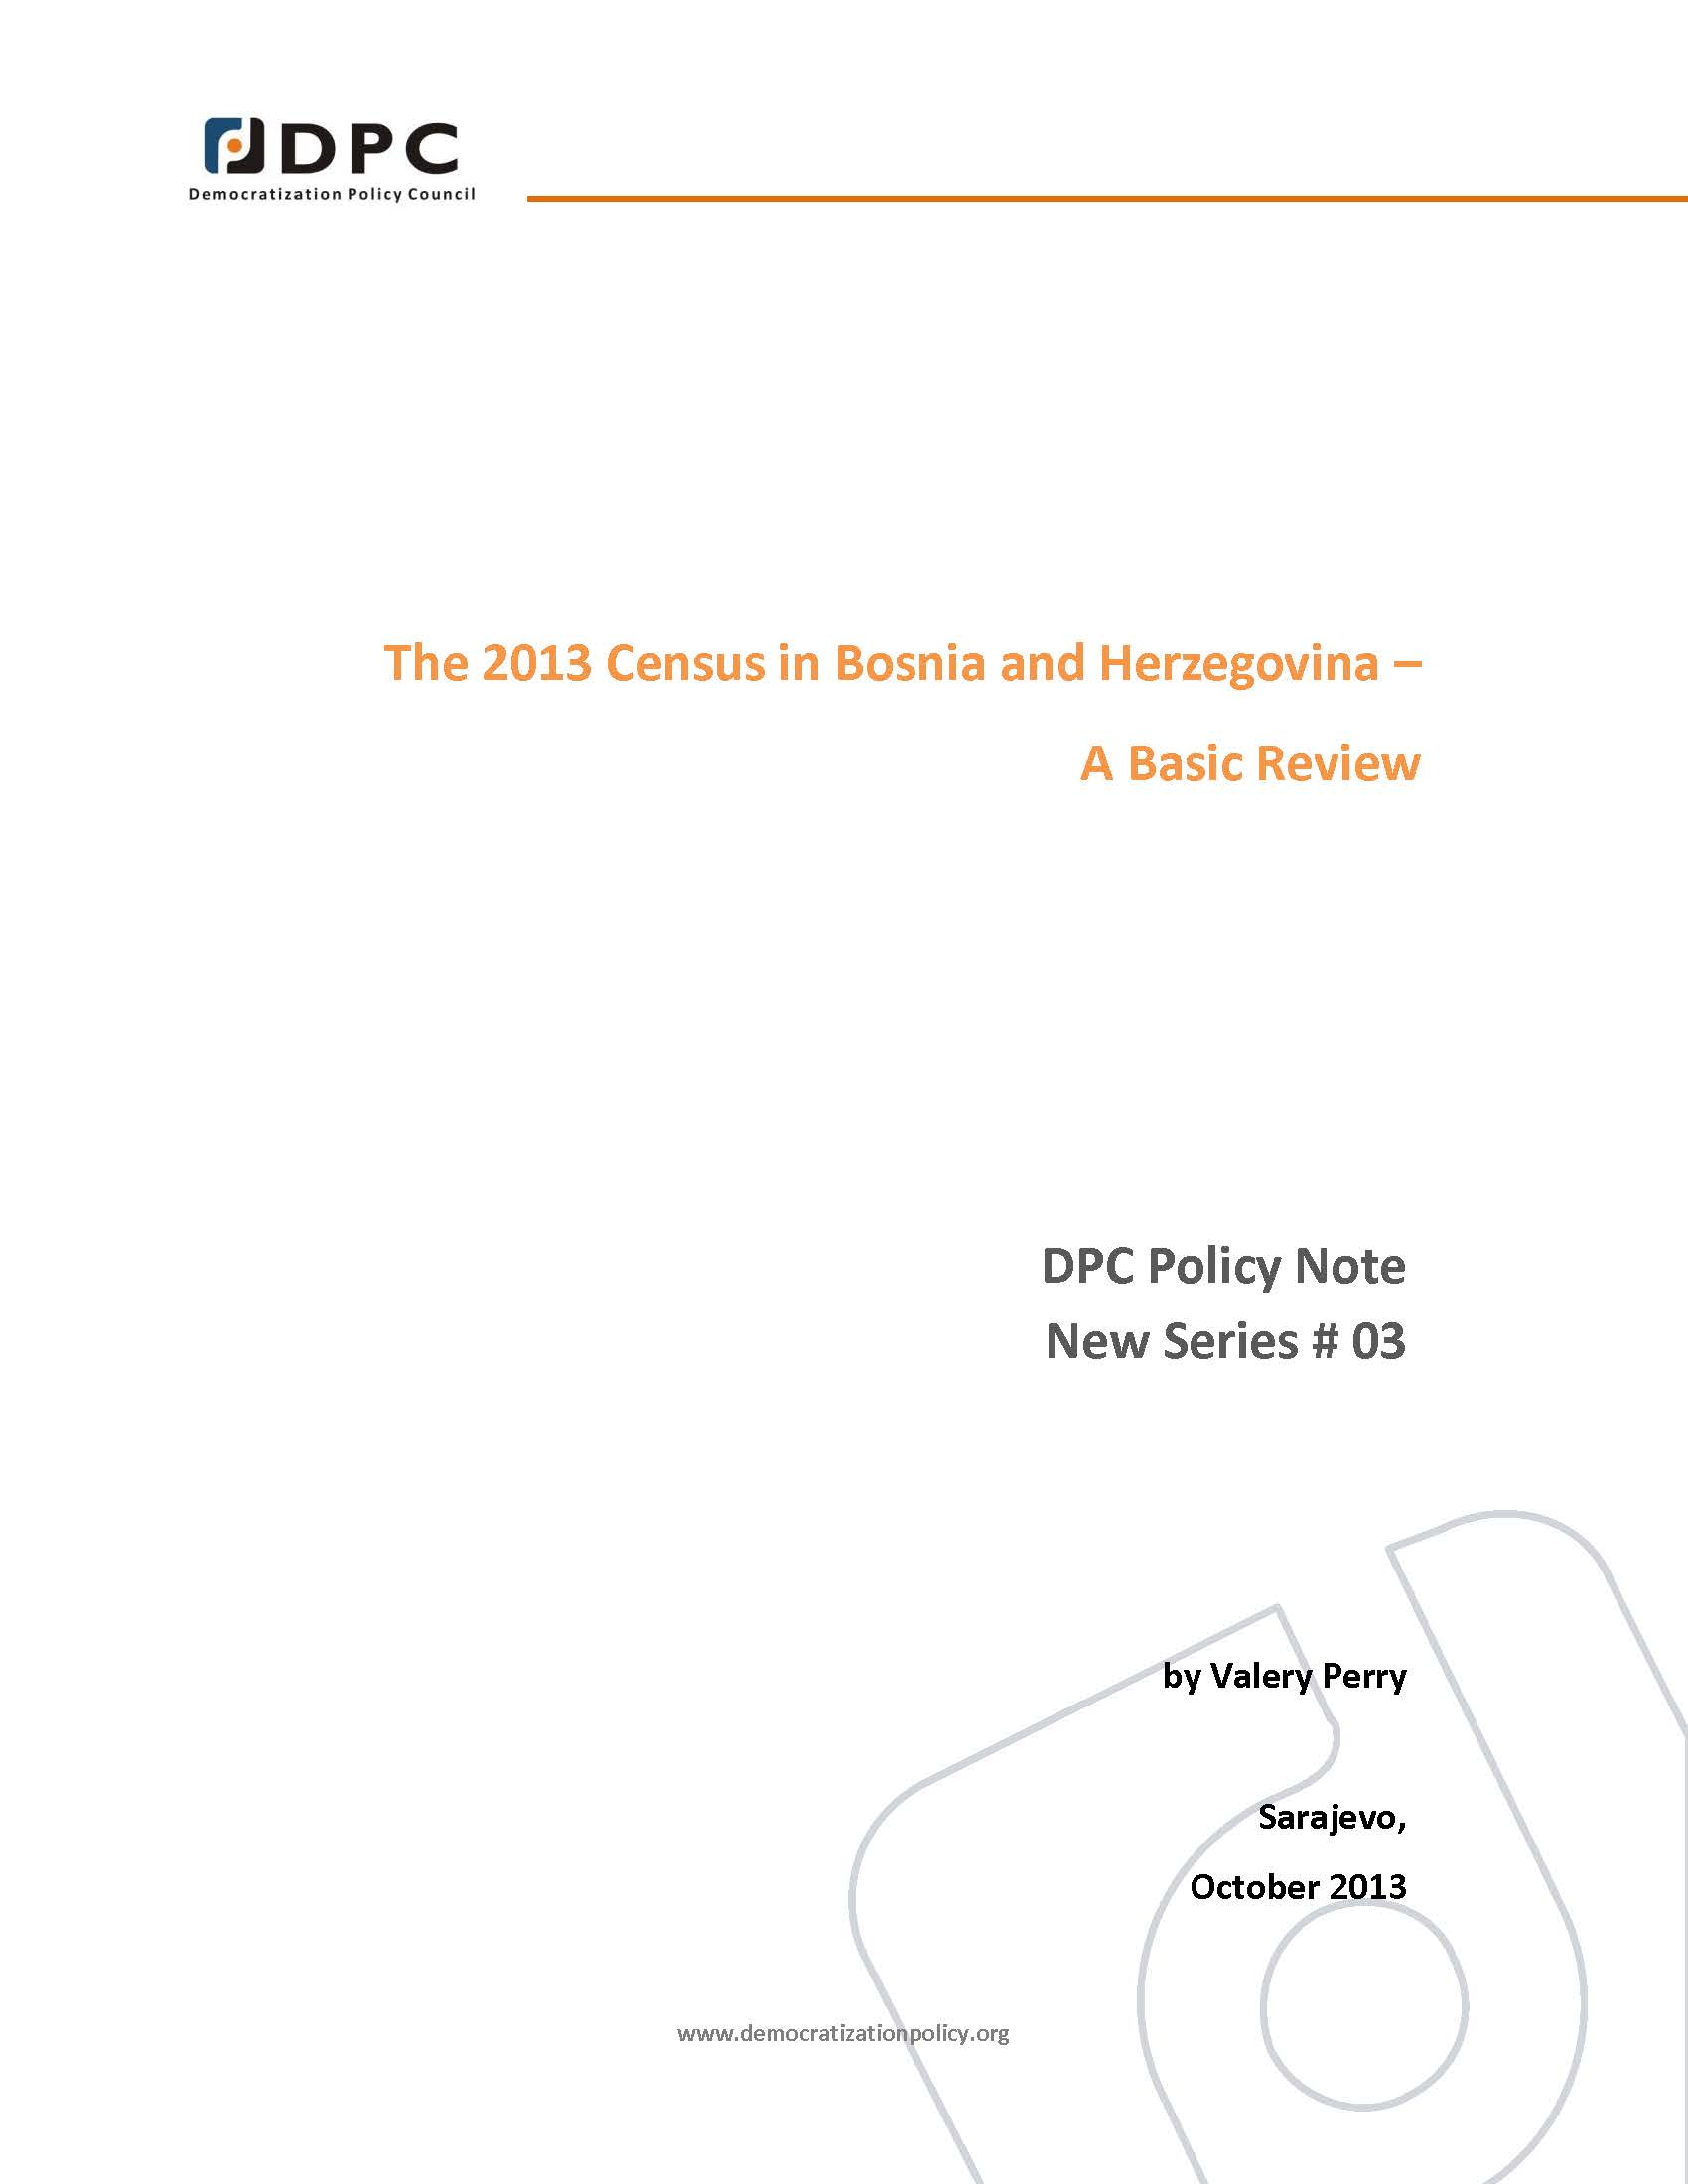 DPC POLICY NOTE 03: The 2013 Census in Bosnia and Herzegovina – A Basic Review.